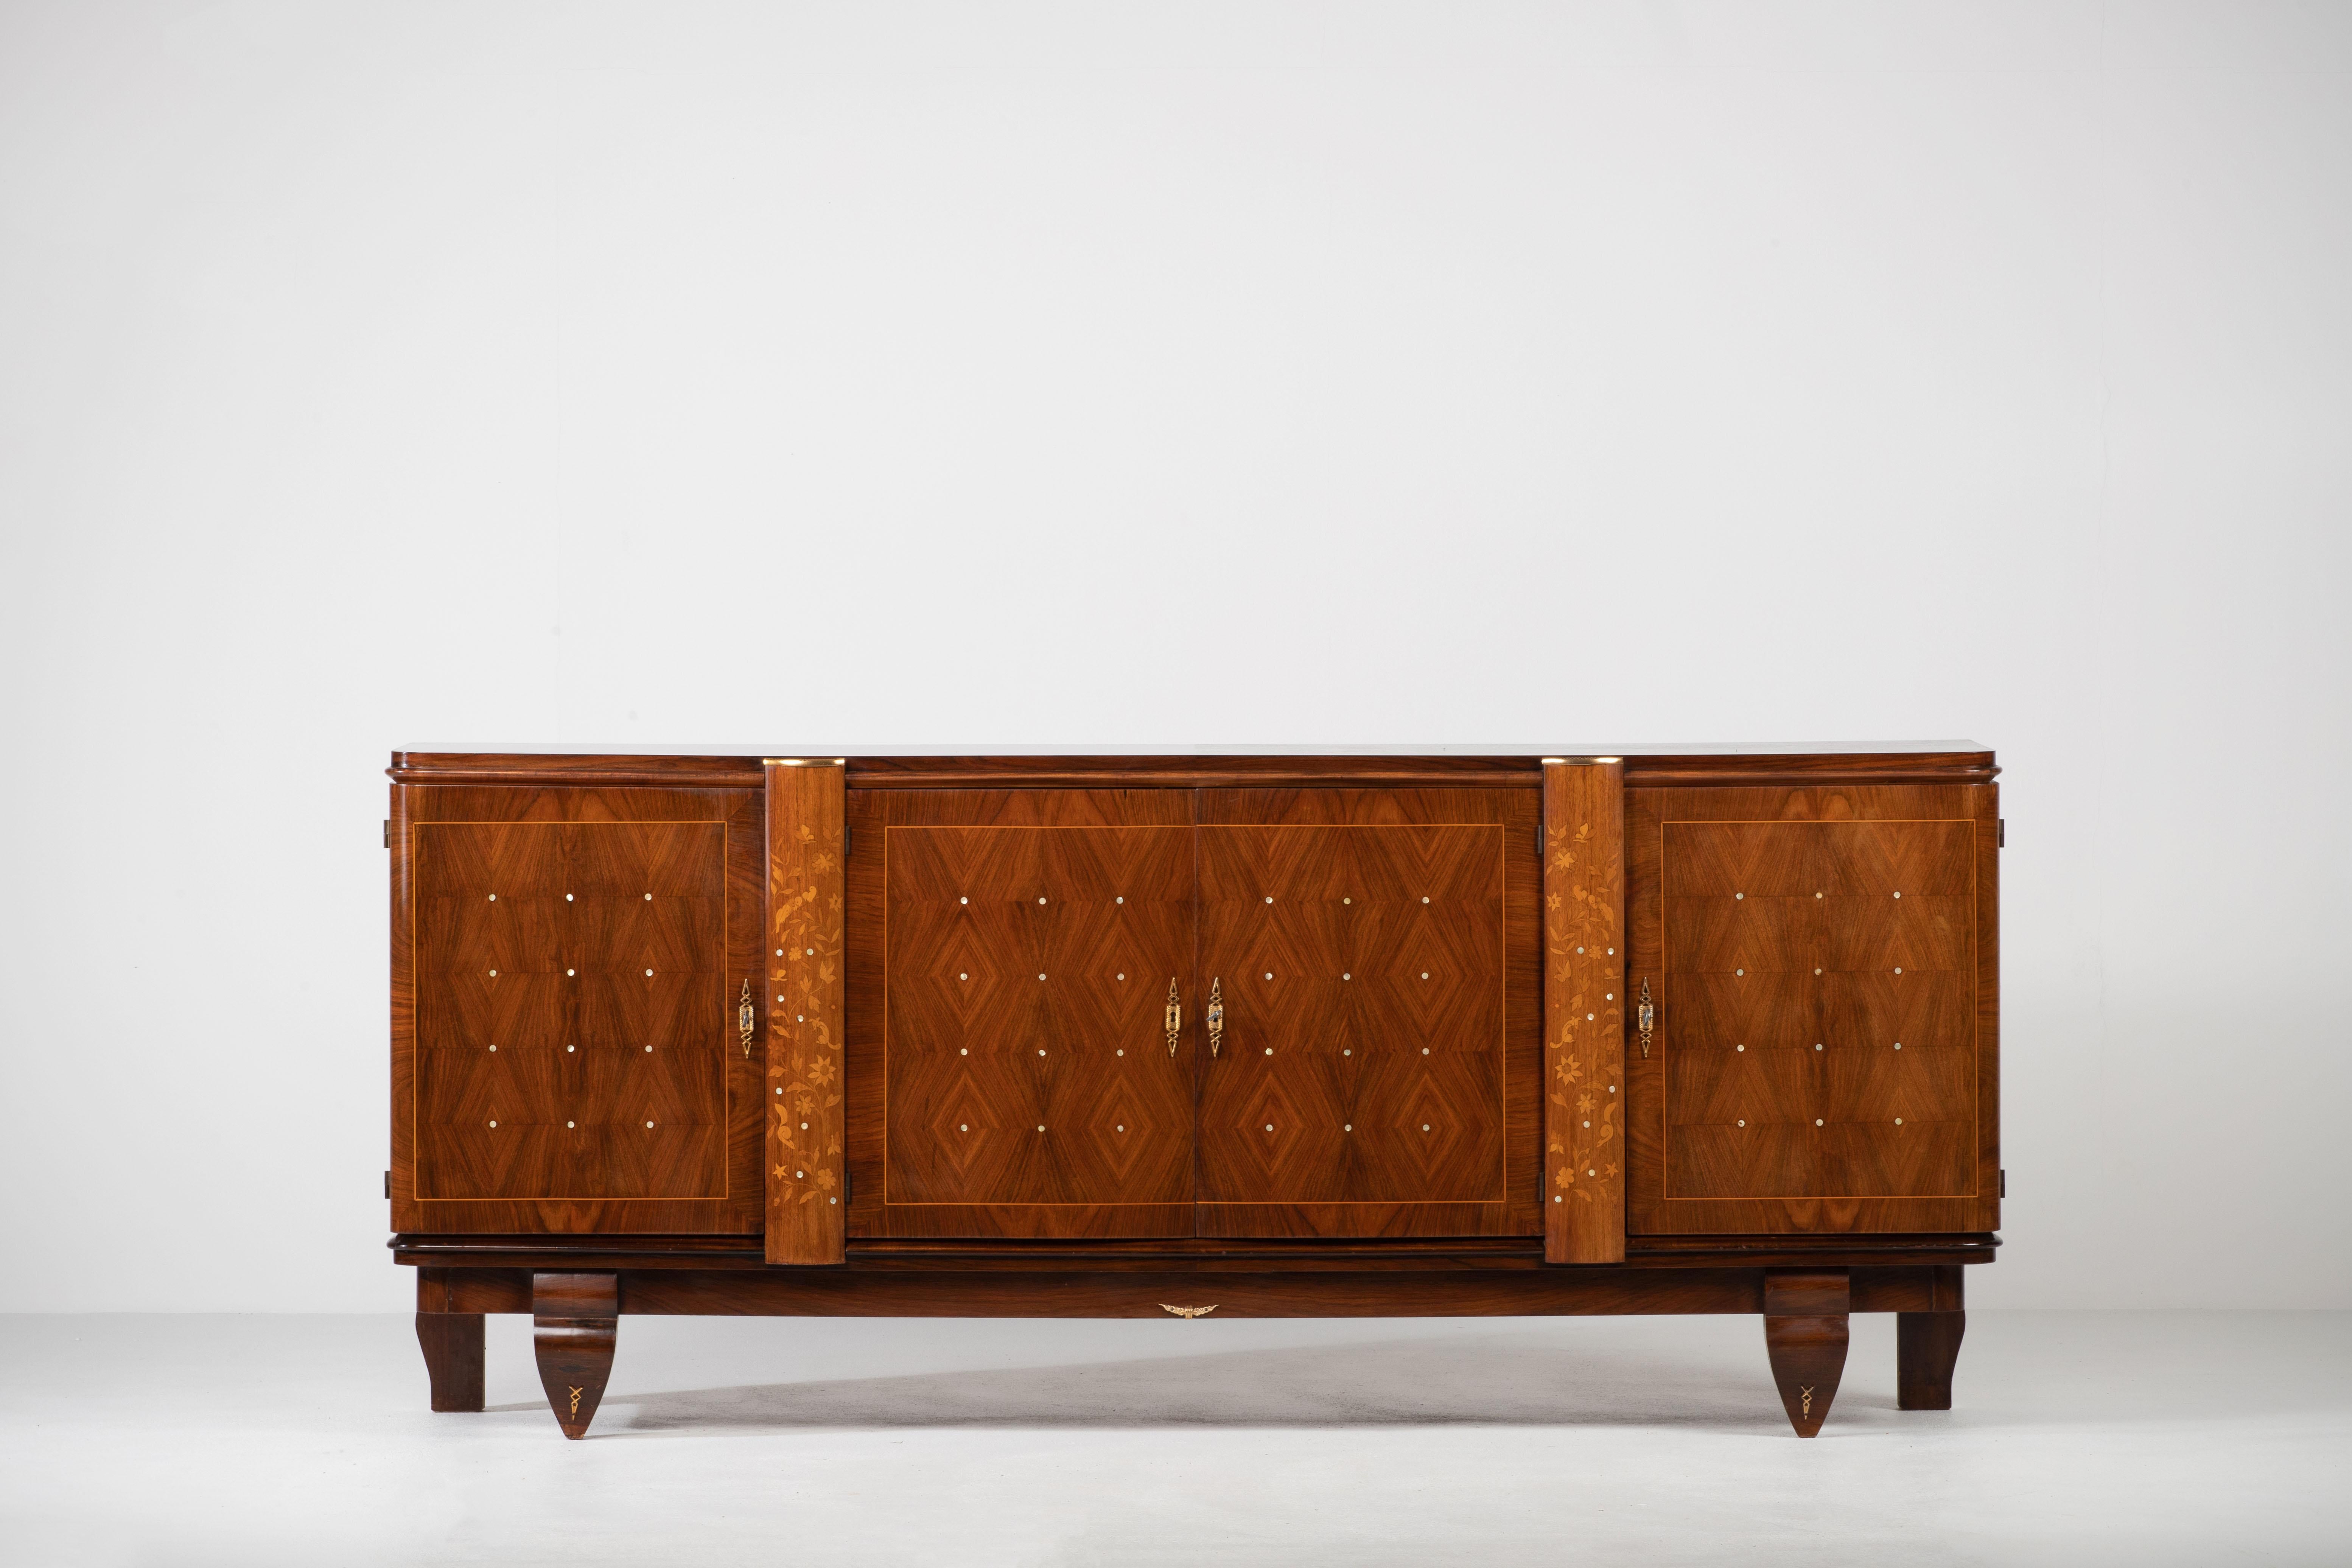 This French Art Deco sideboard, credenza was found in a little Castle in Normandy; France. 
The sideboard features stunning Lemon tree wood grain with a thin decorative mother of pearl inlay design with butterflies and birds. 
The inside is also a